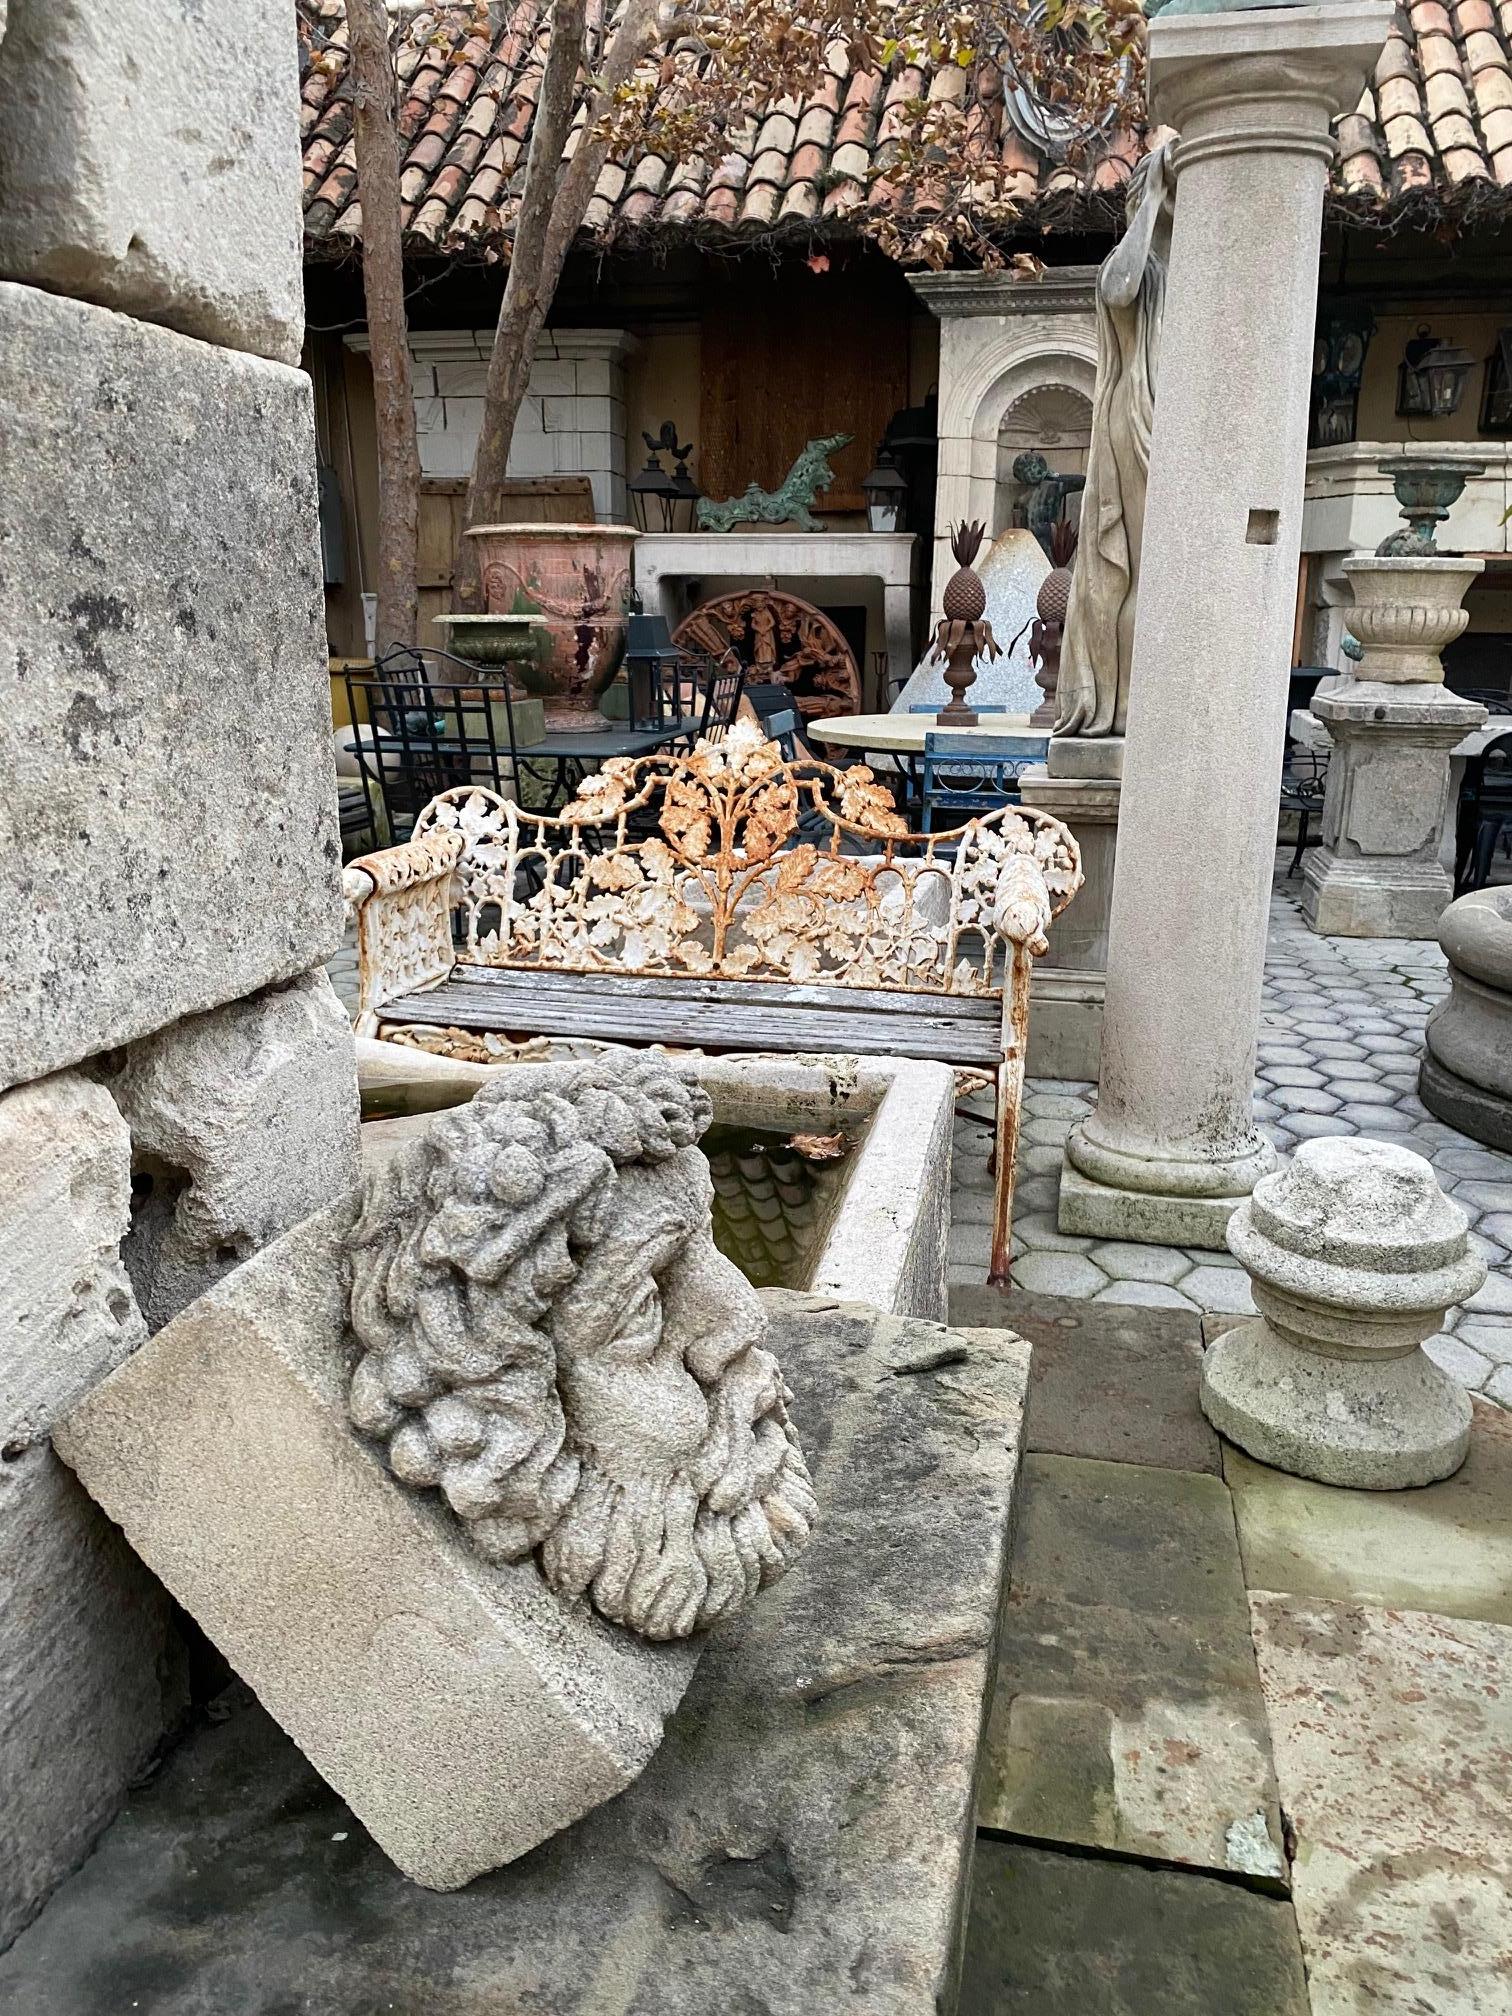 A beautiful Sculpture hand carved fountain head of probably Hercules. It could be installed with a simple water spout or as is. You can pair it with a stone trough basin to create a charming garden water fountain feature we have many available